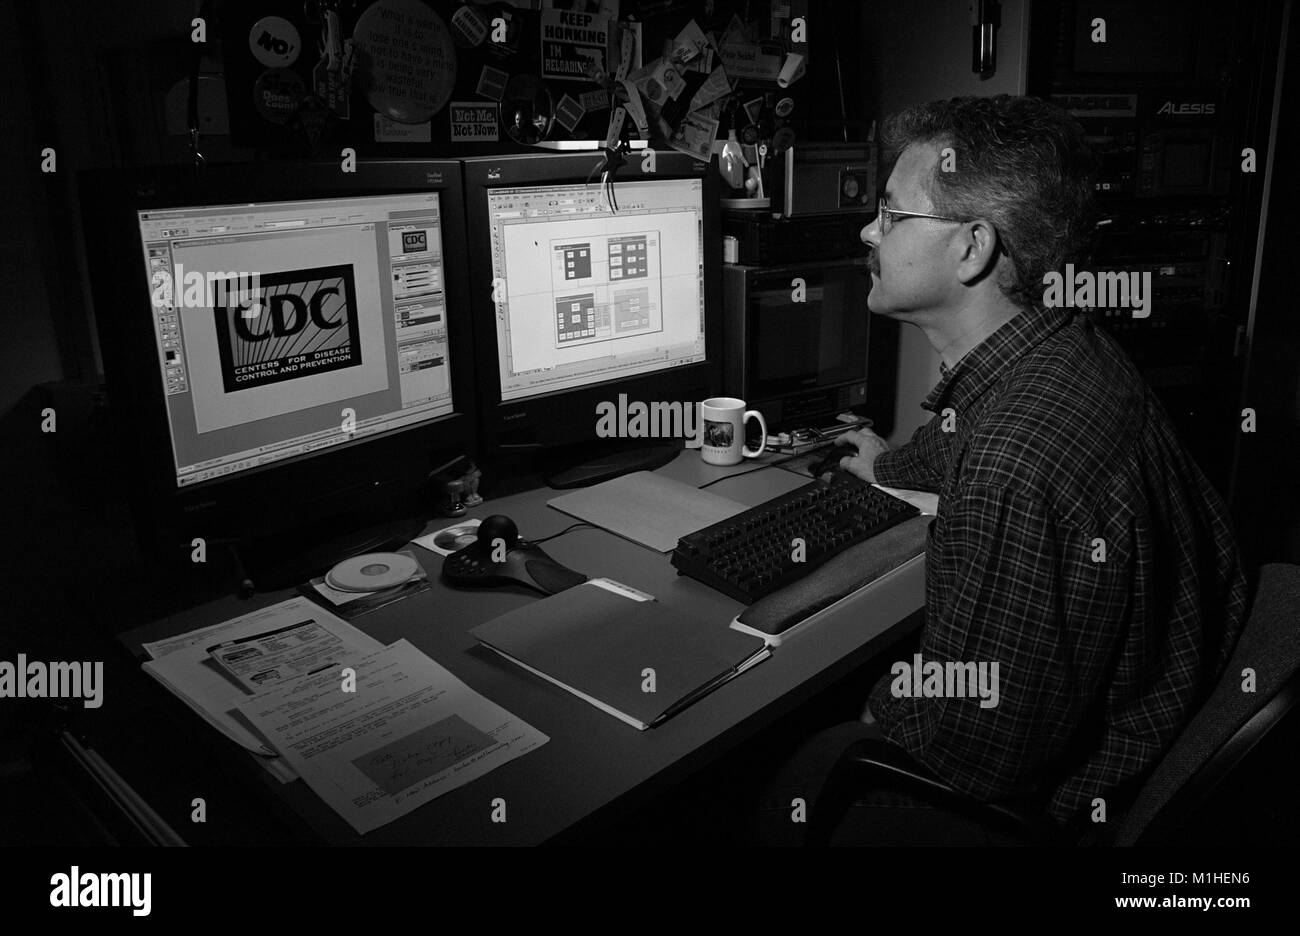 Photograph of Pete Seidel, a computer graphics specialist at the CDC (Acting Branch Chief for the Division of Specialized Media), working at a computer desk on a CDC presentation for the 131st Annual APHA (American Public Health Association) Meeting, 2003. Image courtesy CDC. () Stock Photo